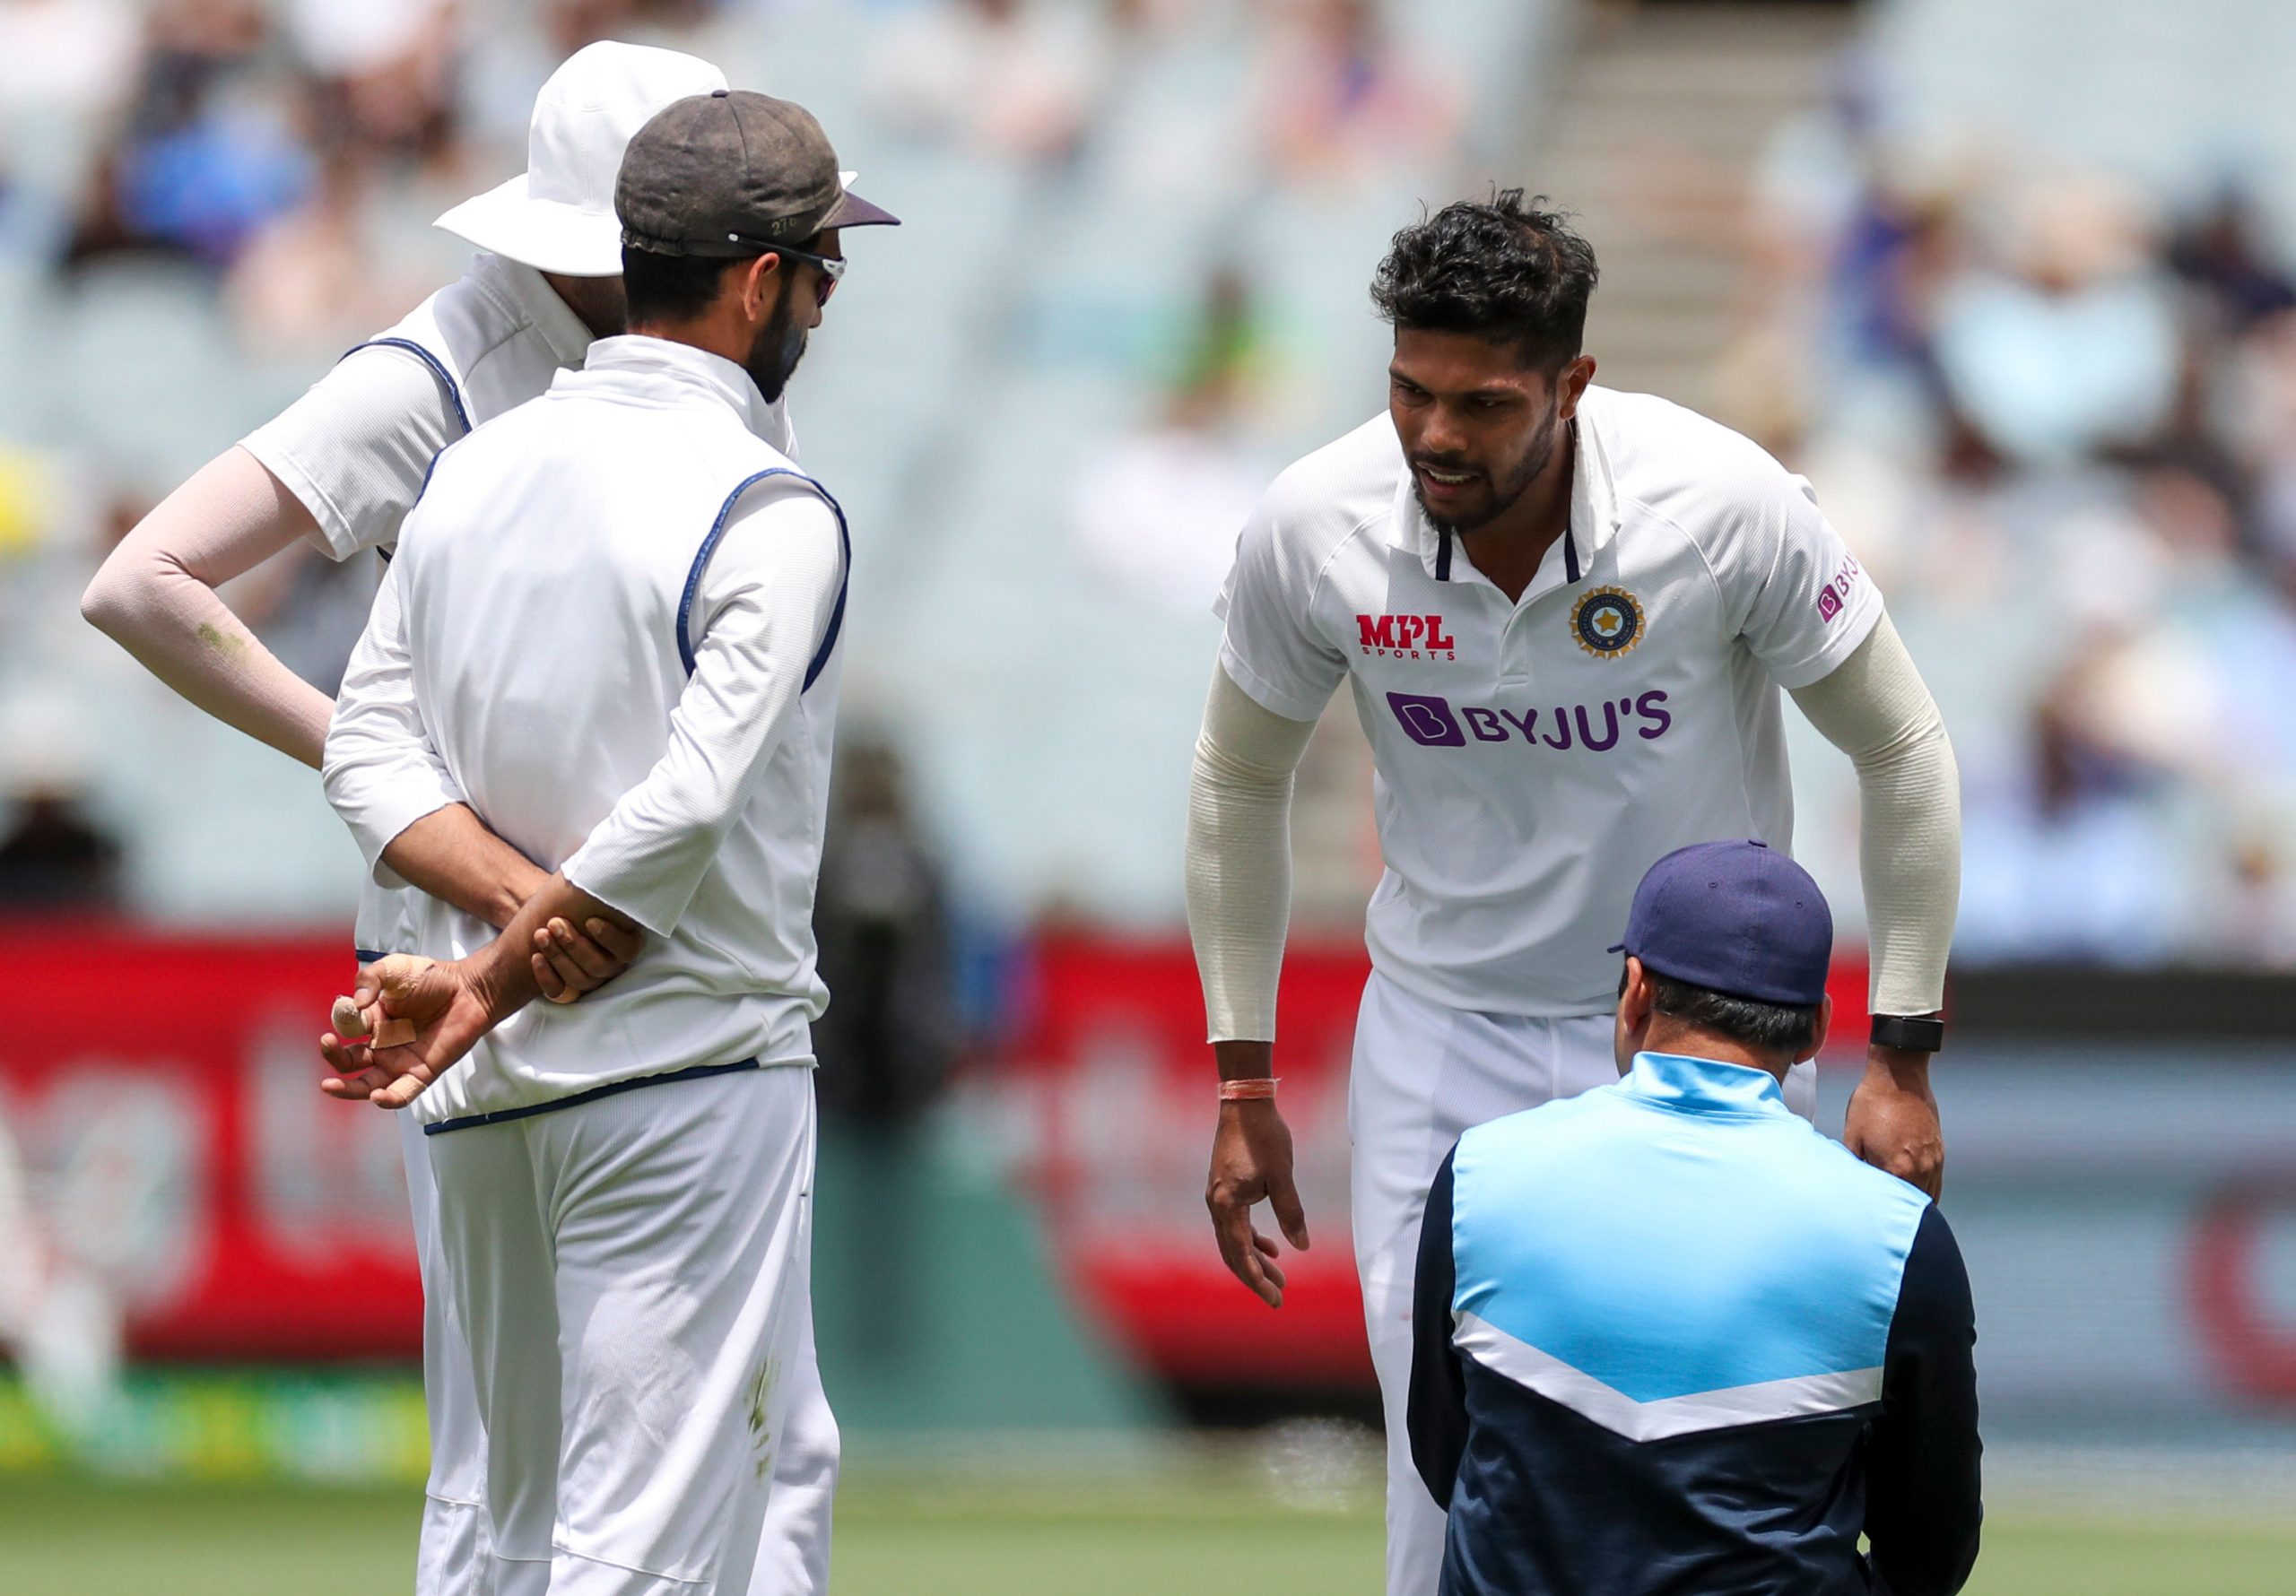 Umesh Yadav out of Test series, Shardul Thakur likely to replace him in third Test